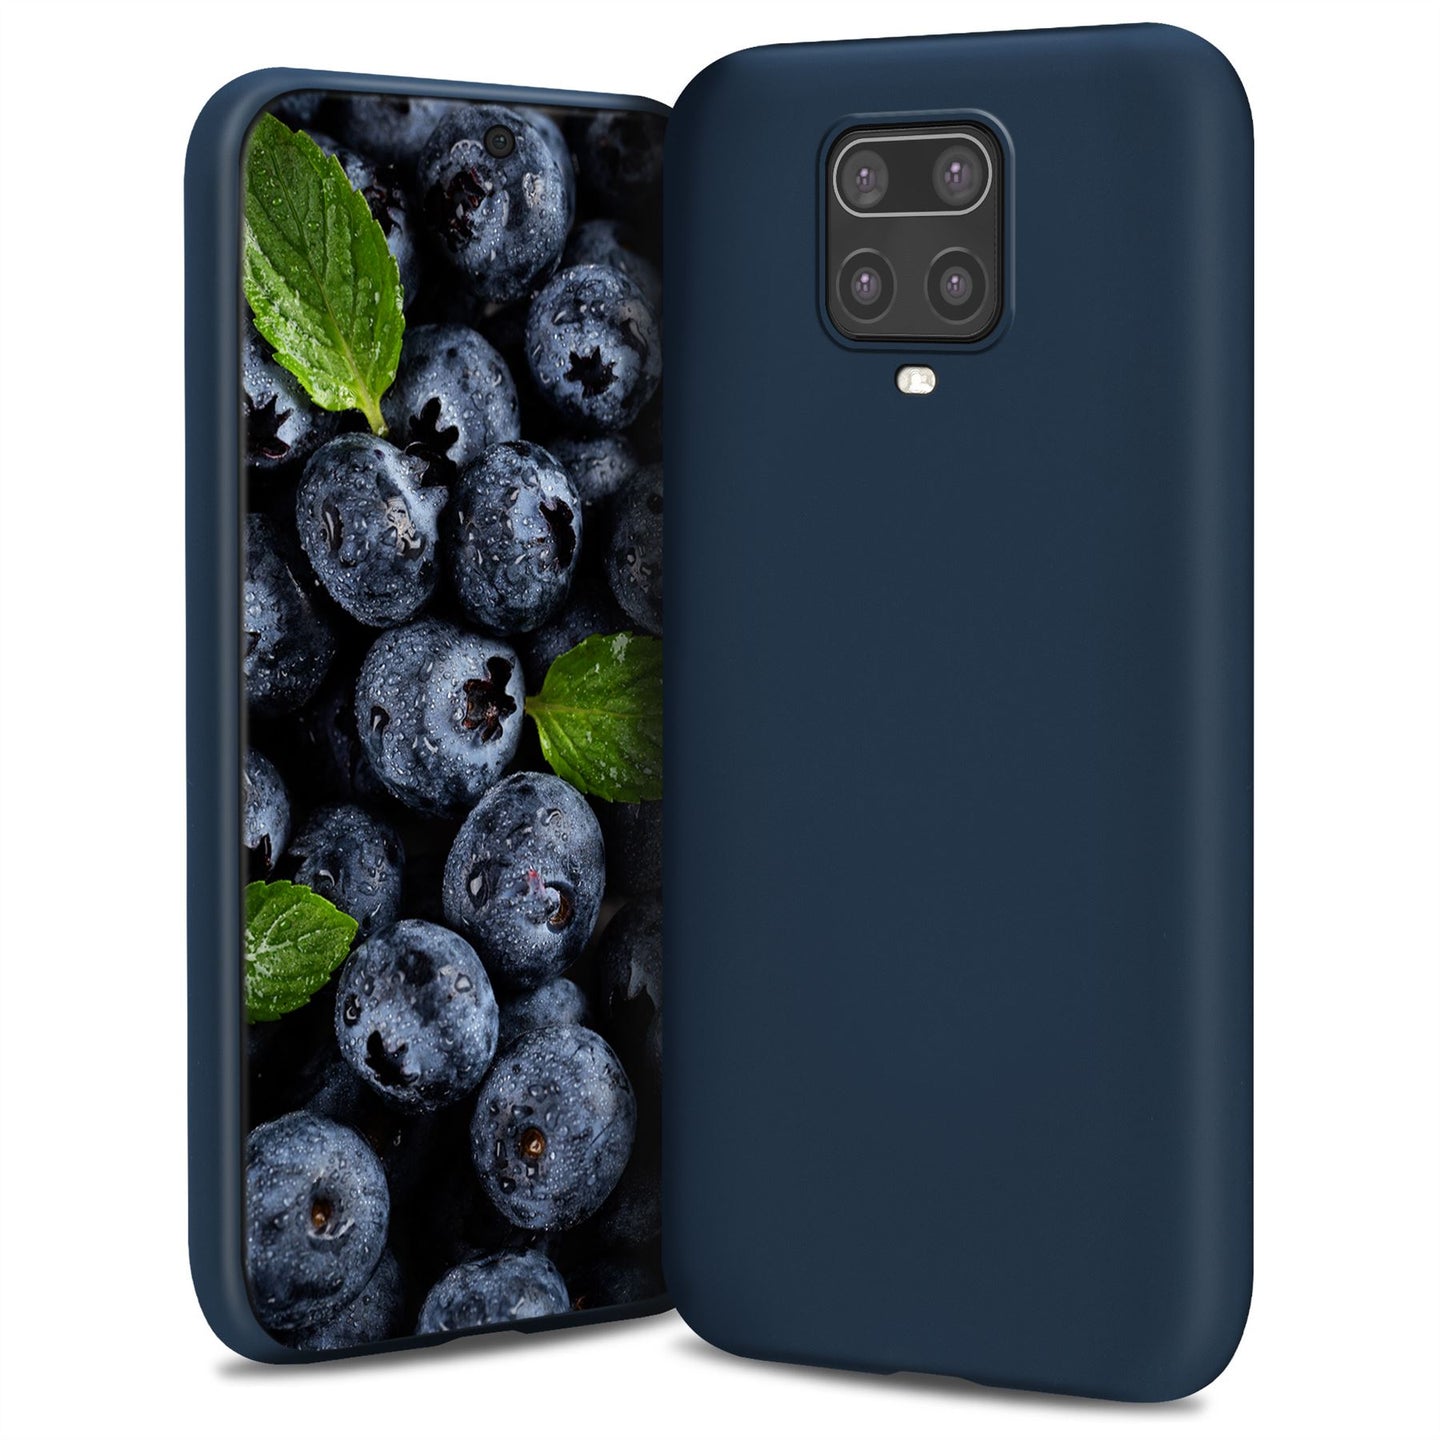 Moozy Lifestyle. Case for Xiaomi Redmi Note 9S, Redmi Note 9 Pro, Midnight Blue - Liquid Silicone Cover with Matte Finish and Soft Microfiber Lining